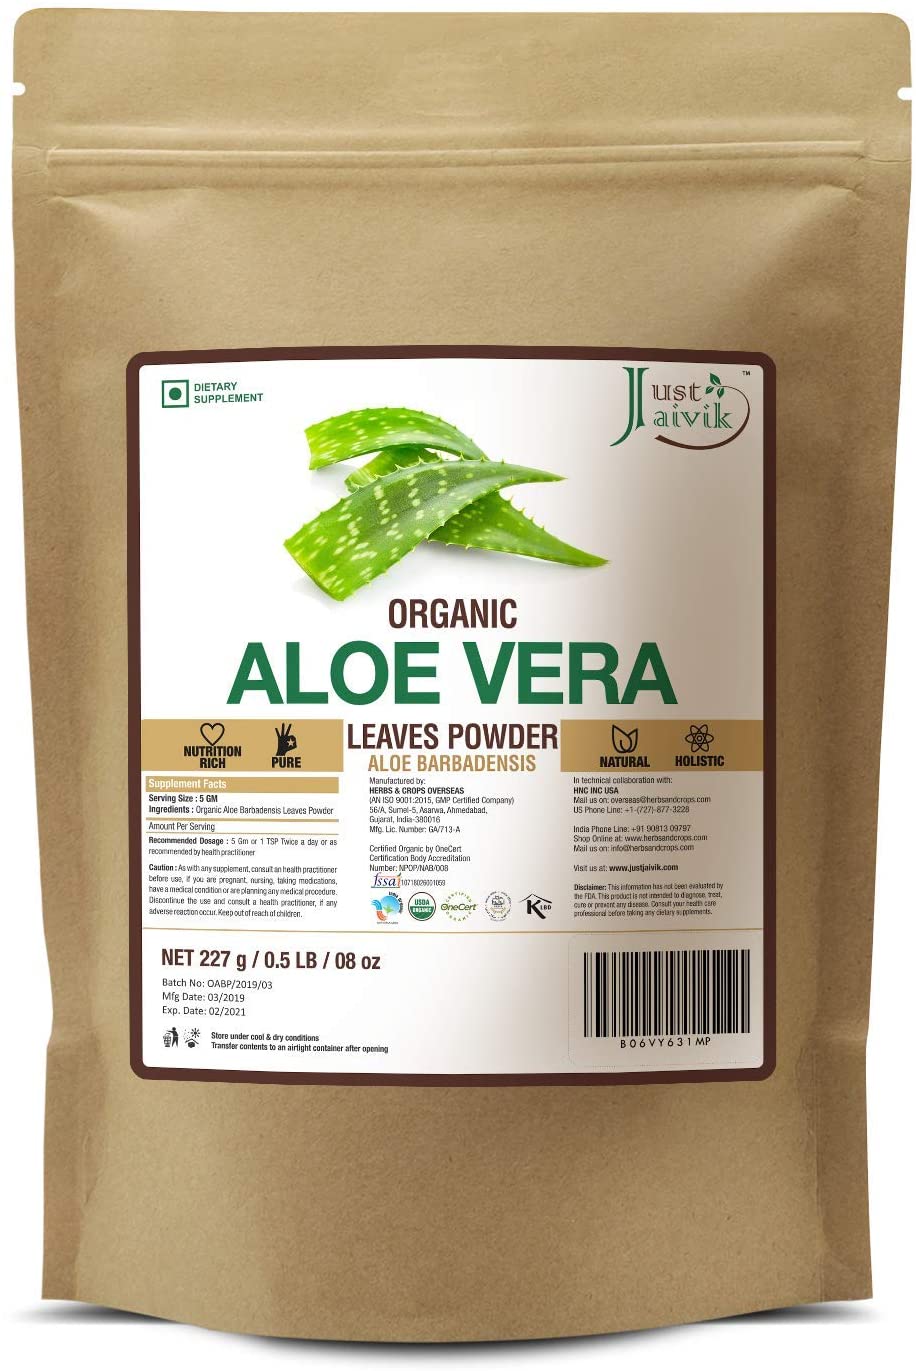 Ranking The Best Aloe Vera Supplements Of 2021 Body Nutrition 4069